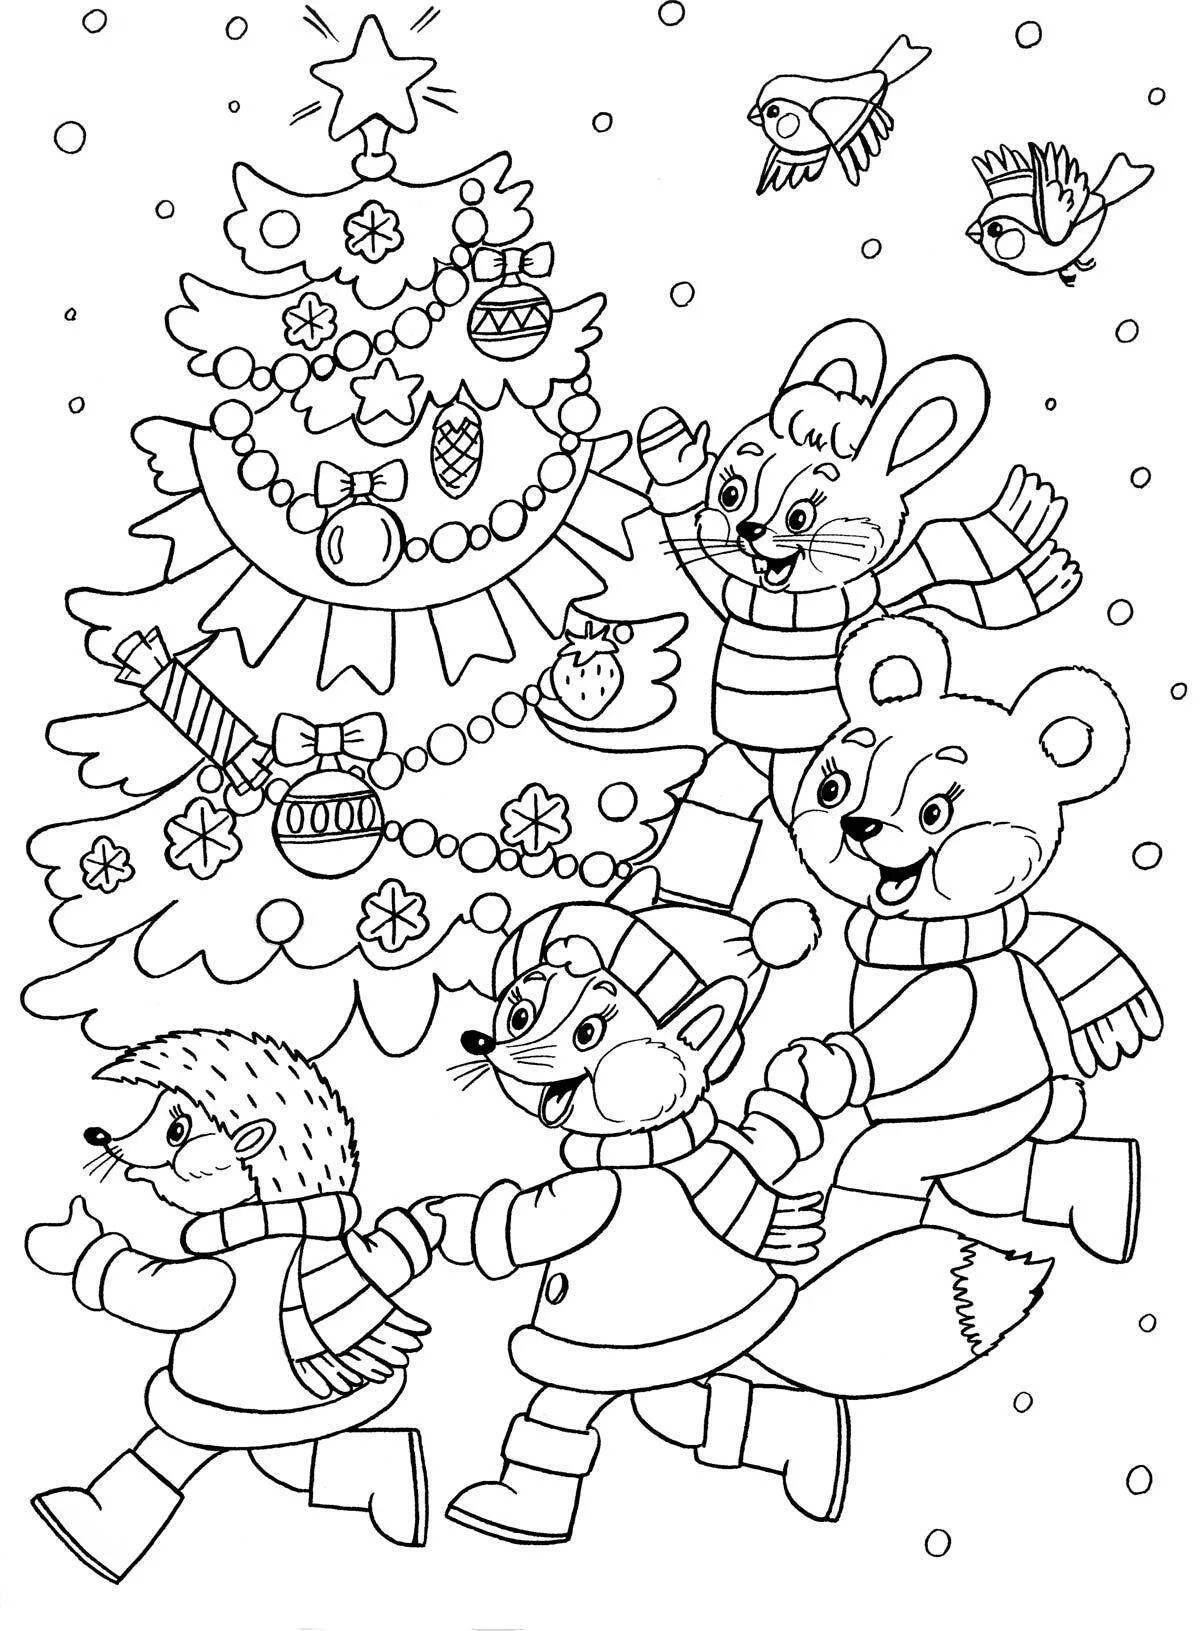 Coloring book magic new year 9 years